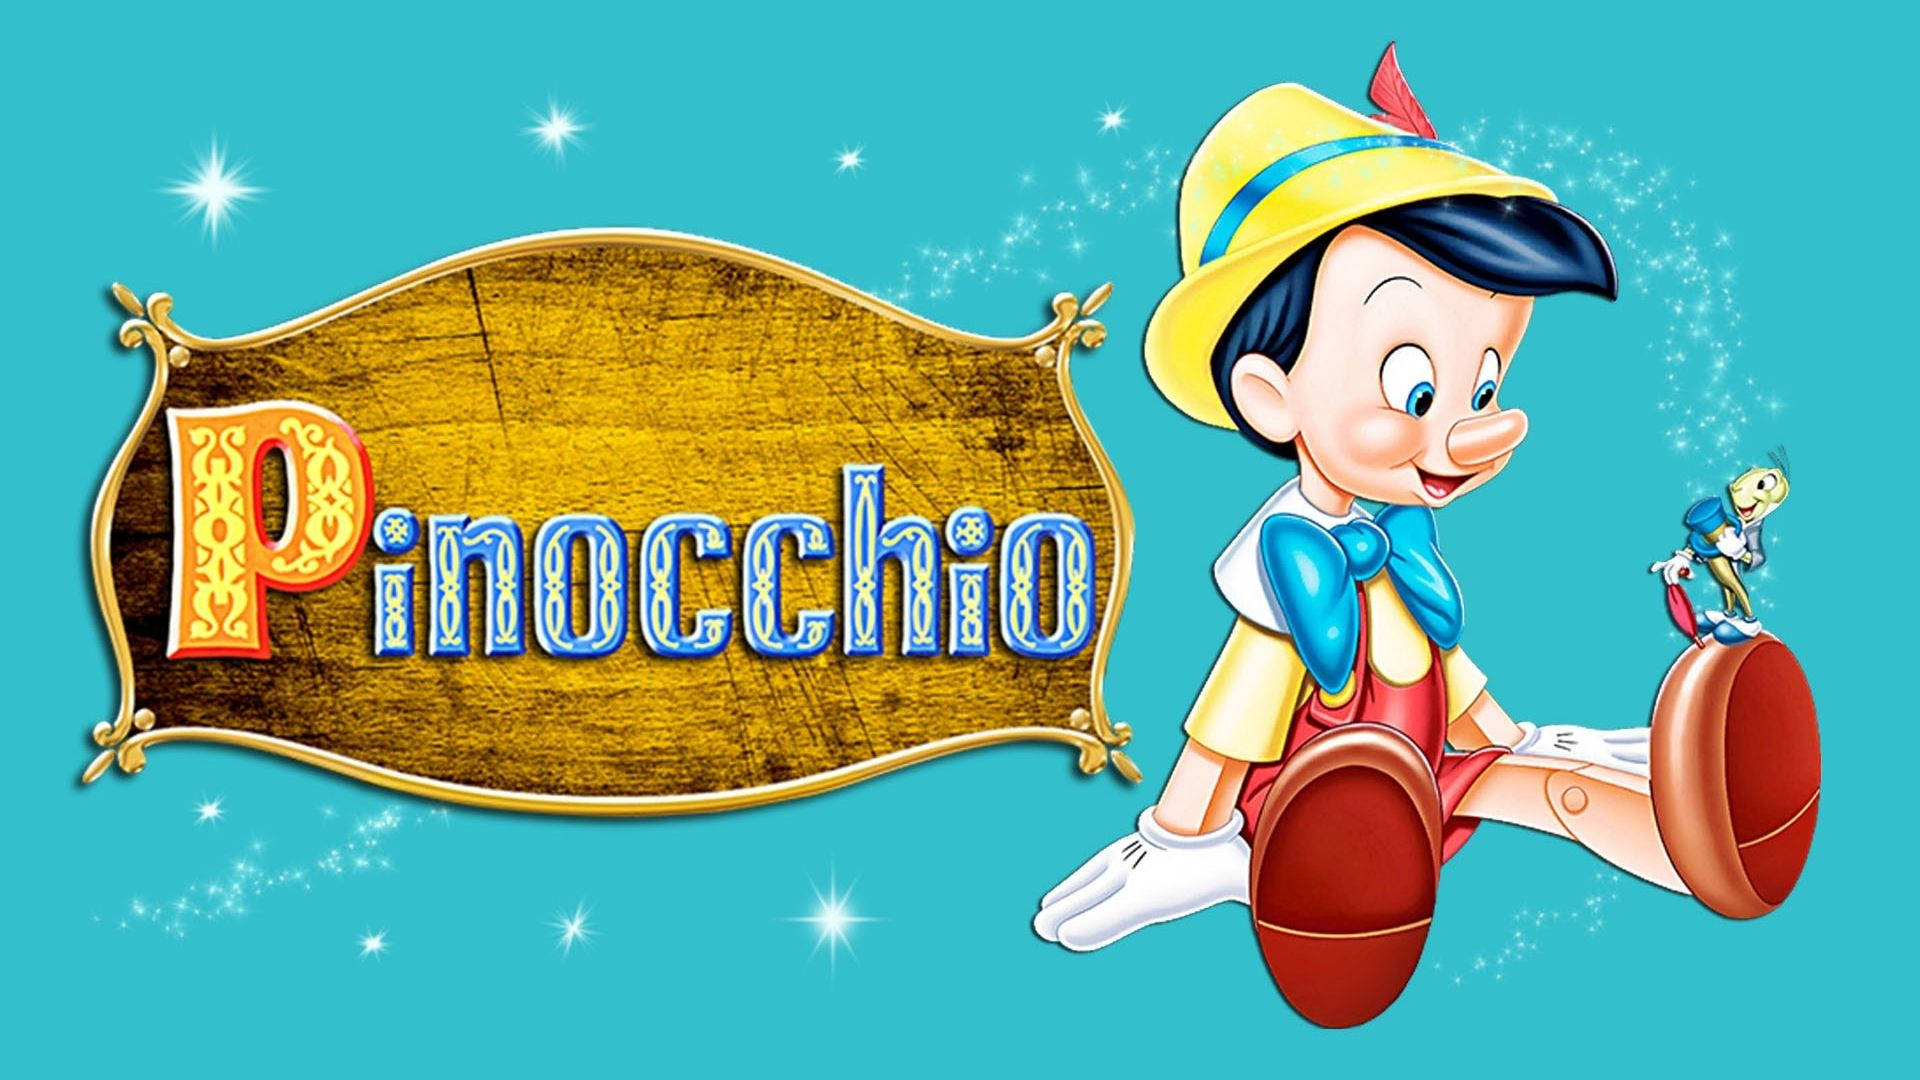 Lovely Pinocchio Wallpaper